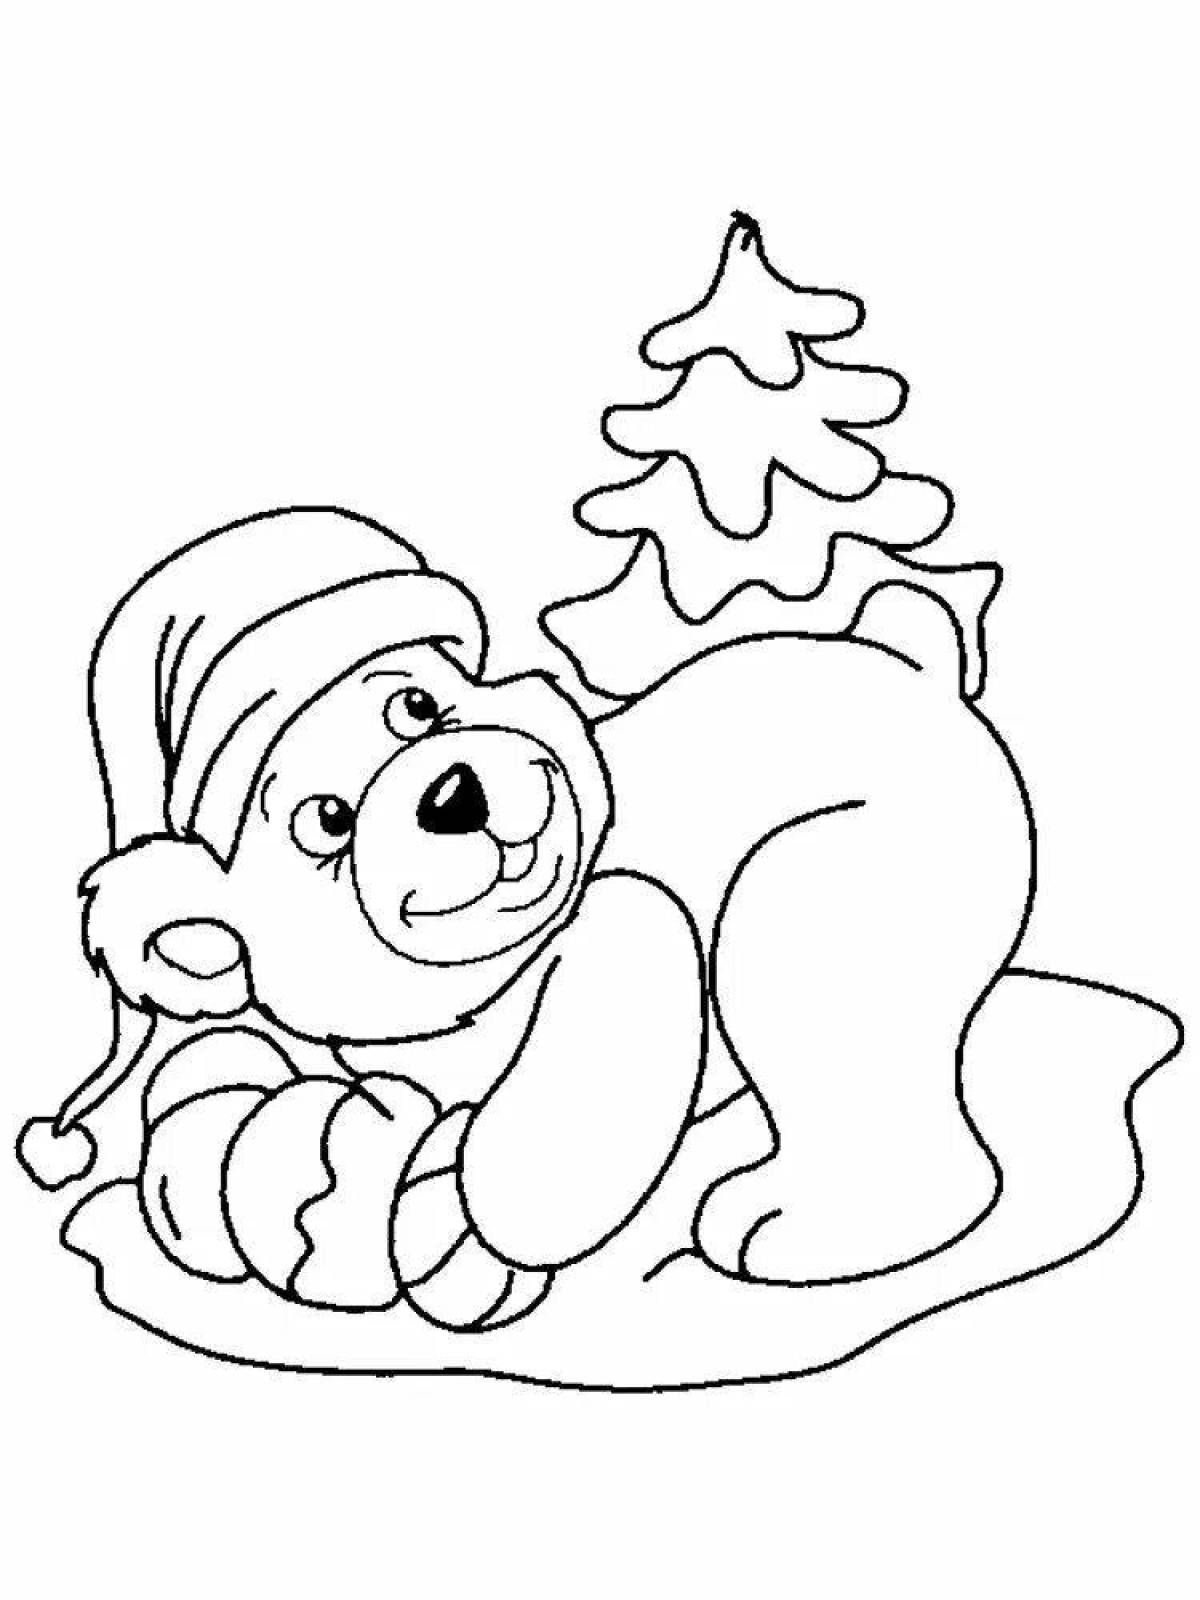 Sunny winter coloring page